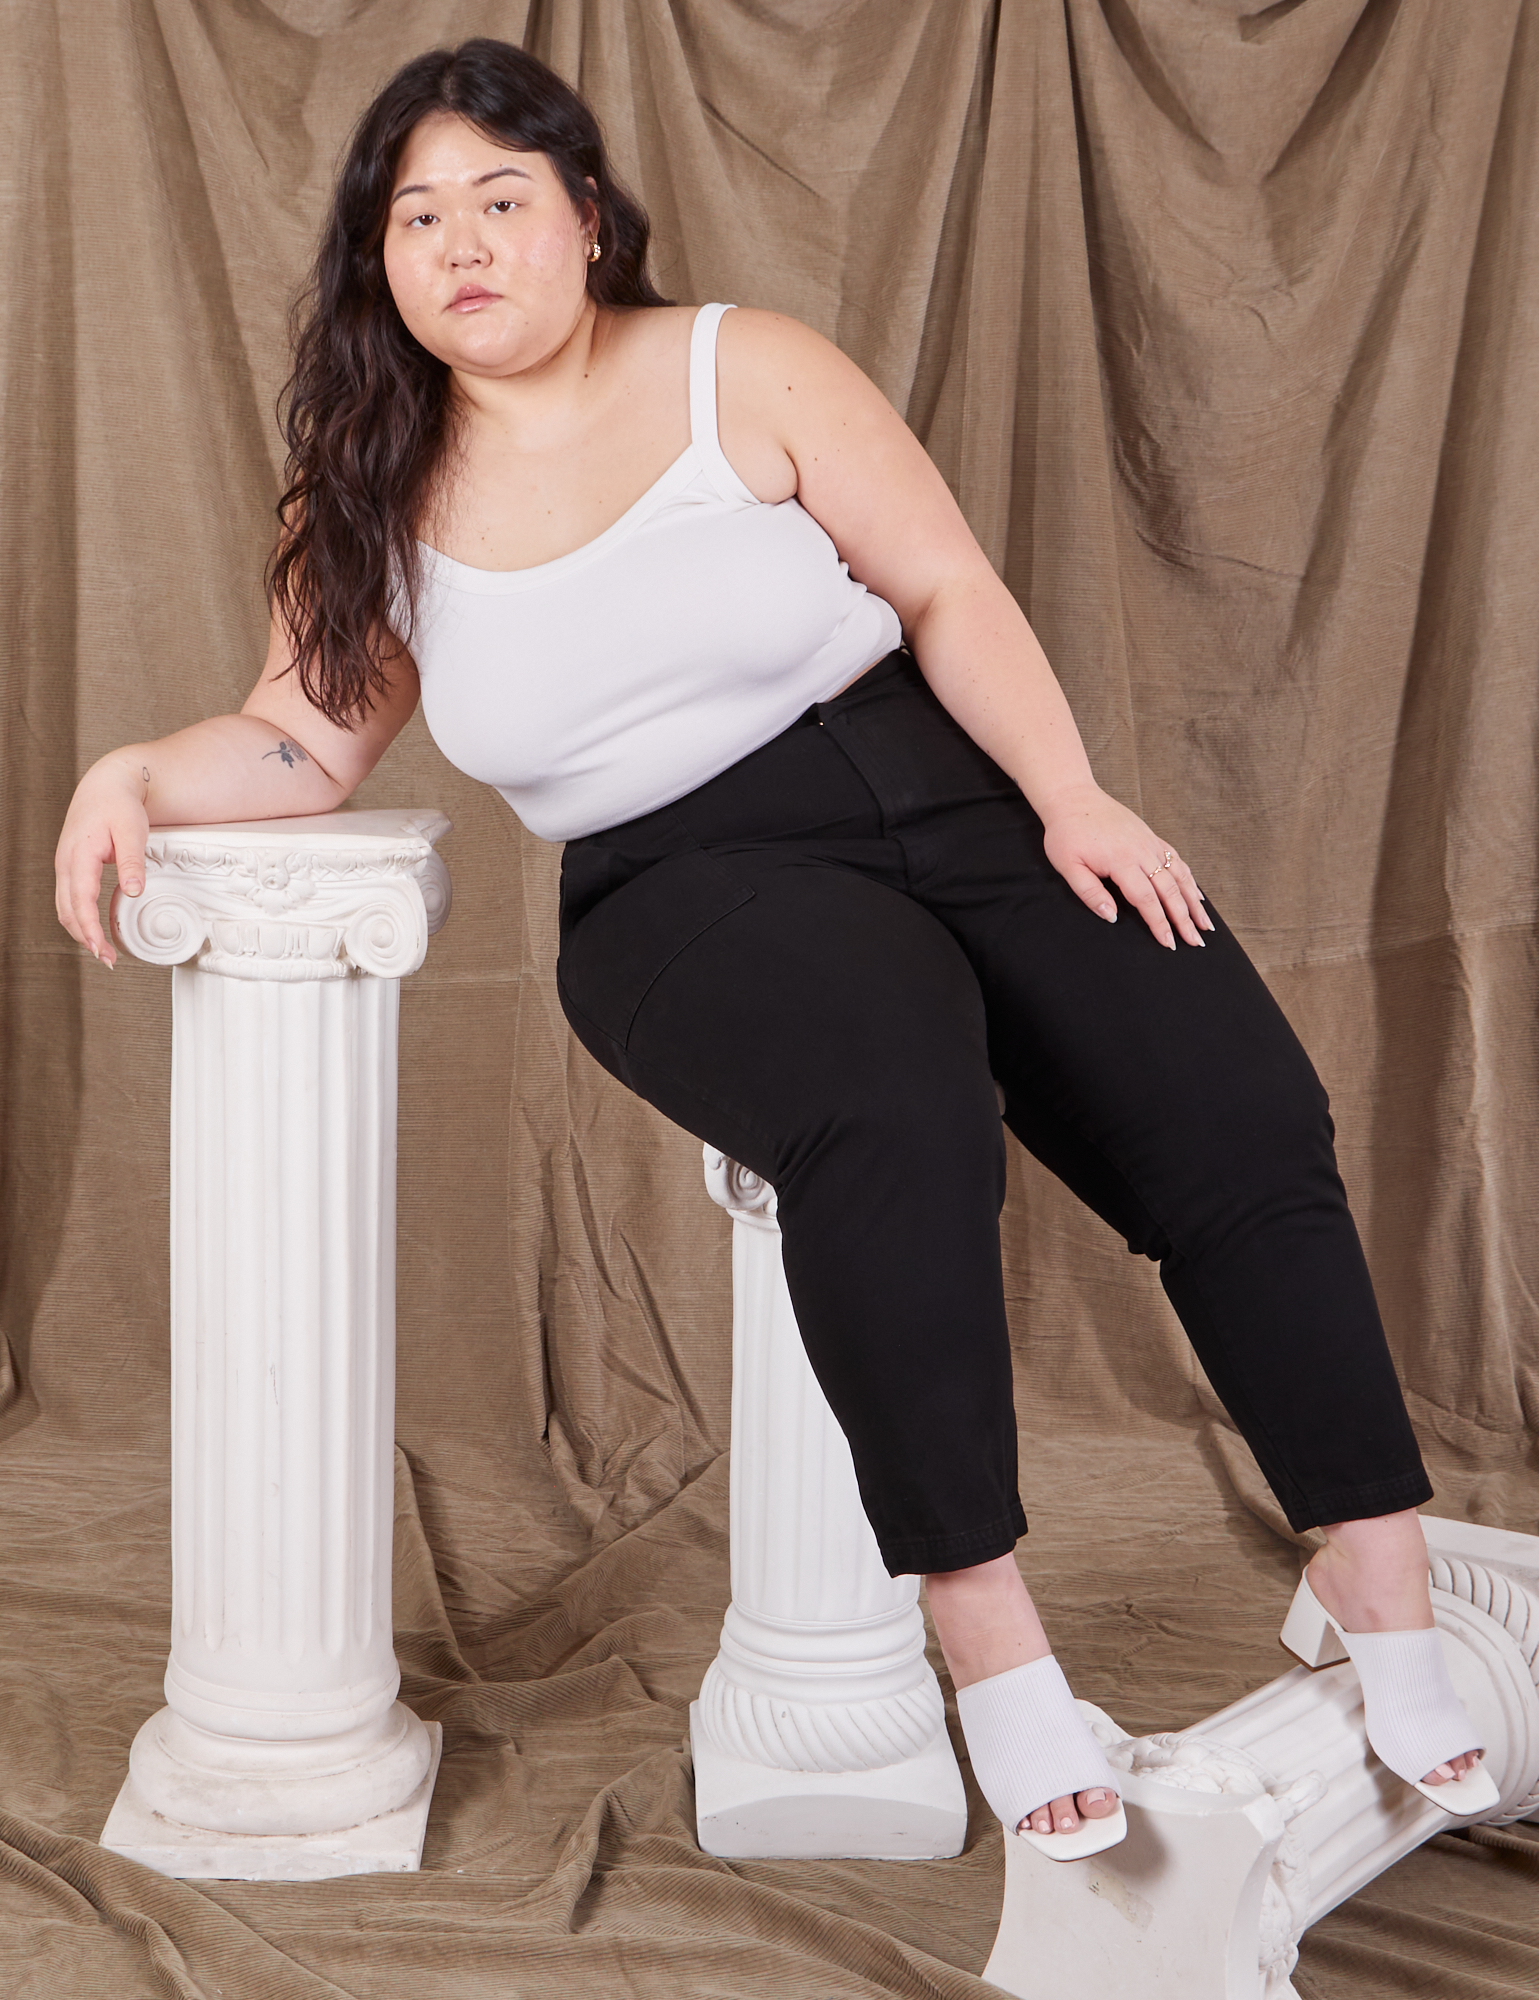 Ashley is wearing Petite Pencil Pants in Basic Black and vintage off-white Cropped Cami